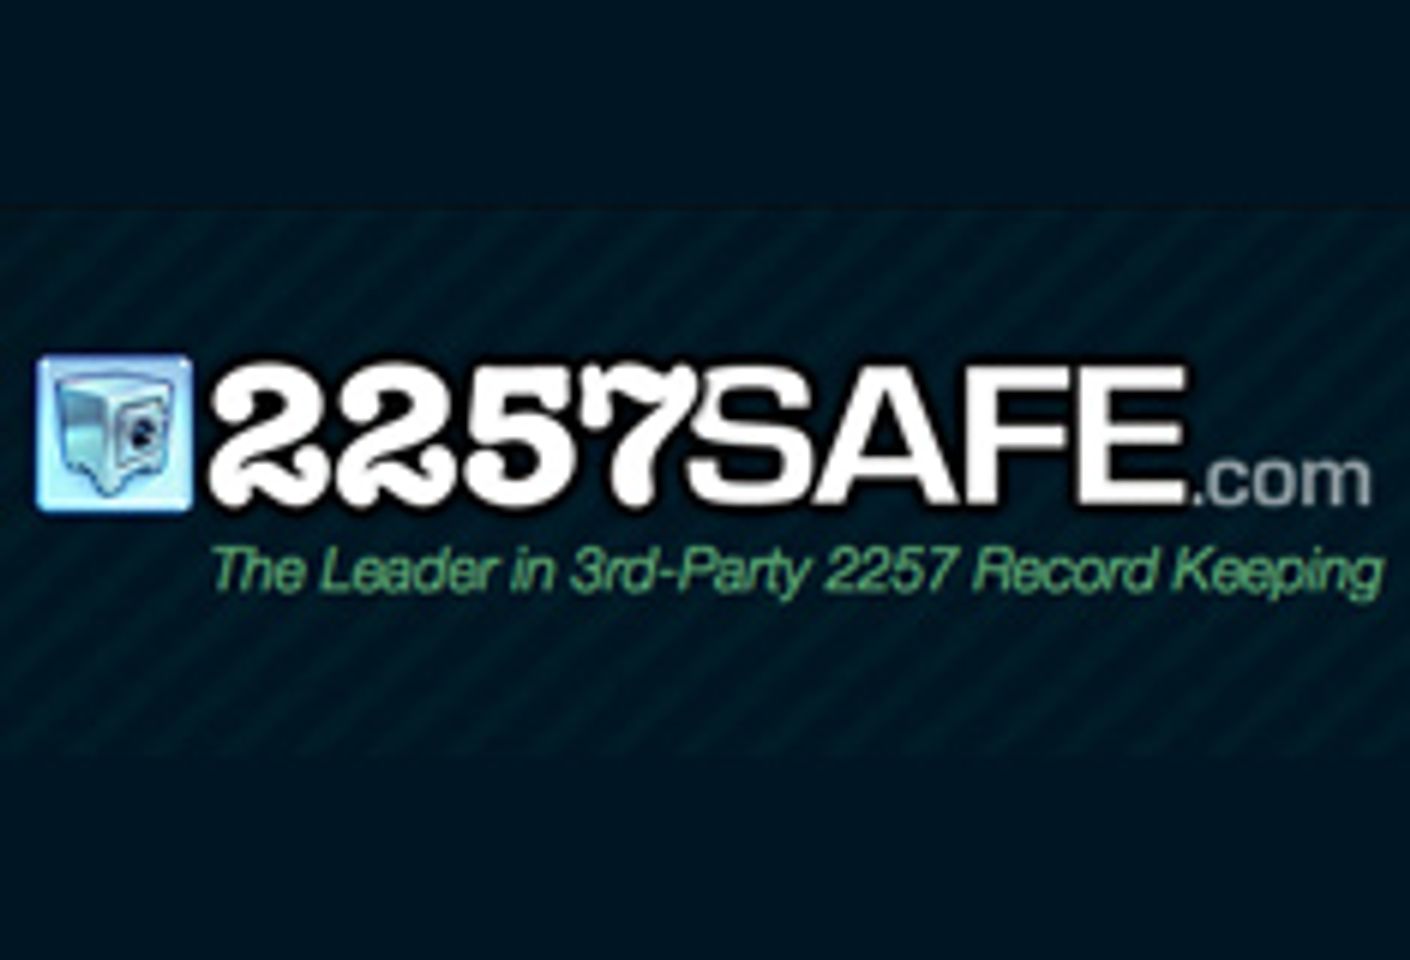 Webair Offers Clients Half Off 2257Safe.com Services for First Three Months